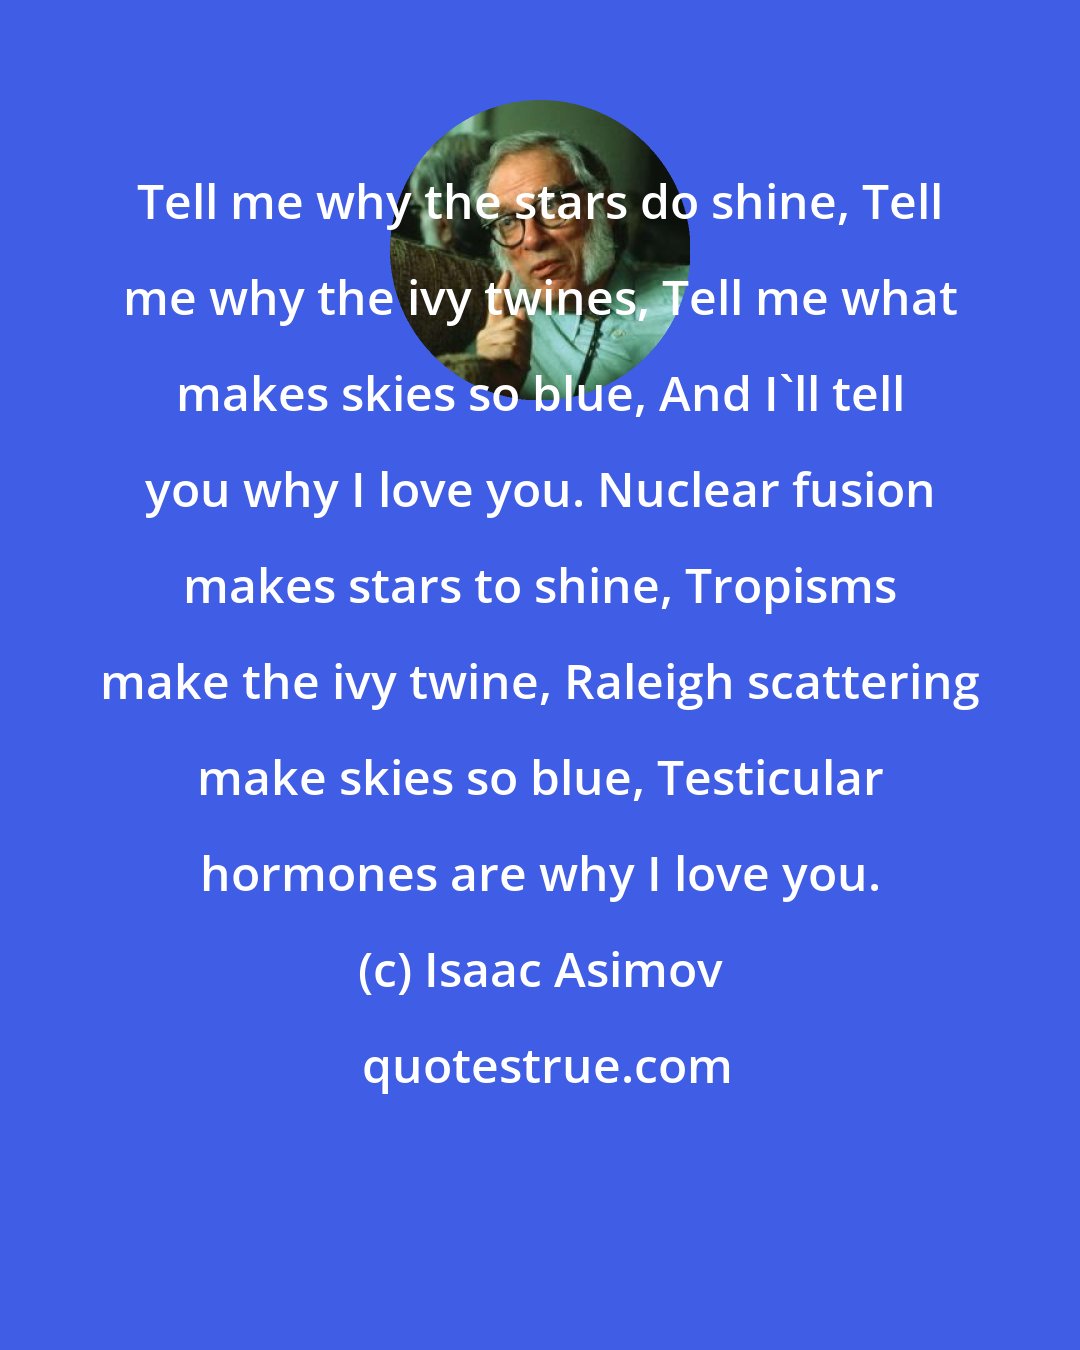 Isaac Asimov: Tell me why the stars do shine, Tell me why the ivy twines, Tell me what makes skies so blue, And I'll tell you why I love you. Nuclear fusion makes stars to shine, Tropisms make the ivy twine, Raleigh scattering make skies so blue, Testicular hormones are why I love you.